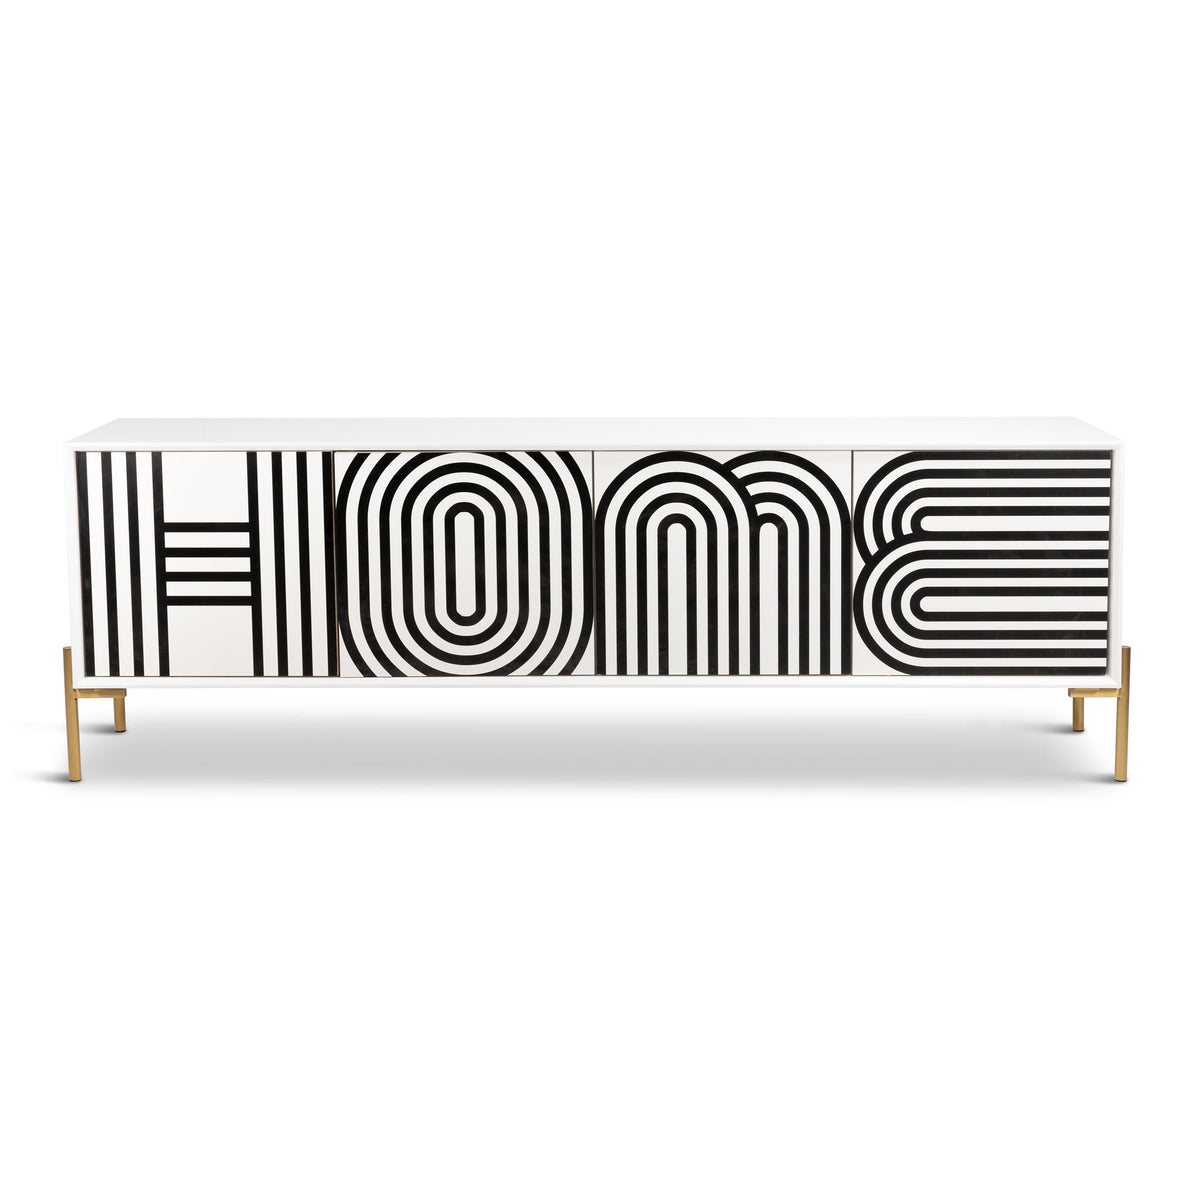 Home Is Where The Heart Is Credenza